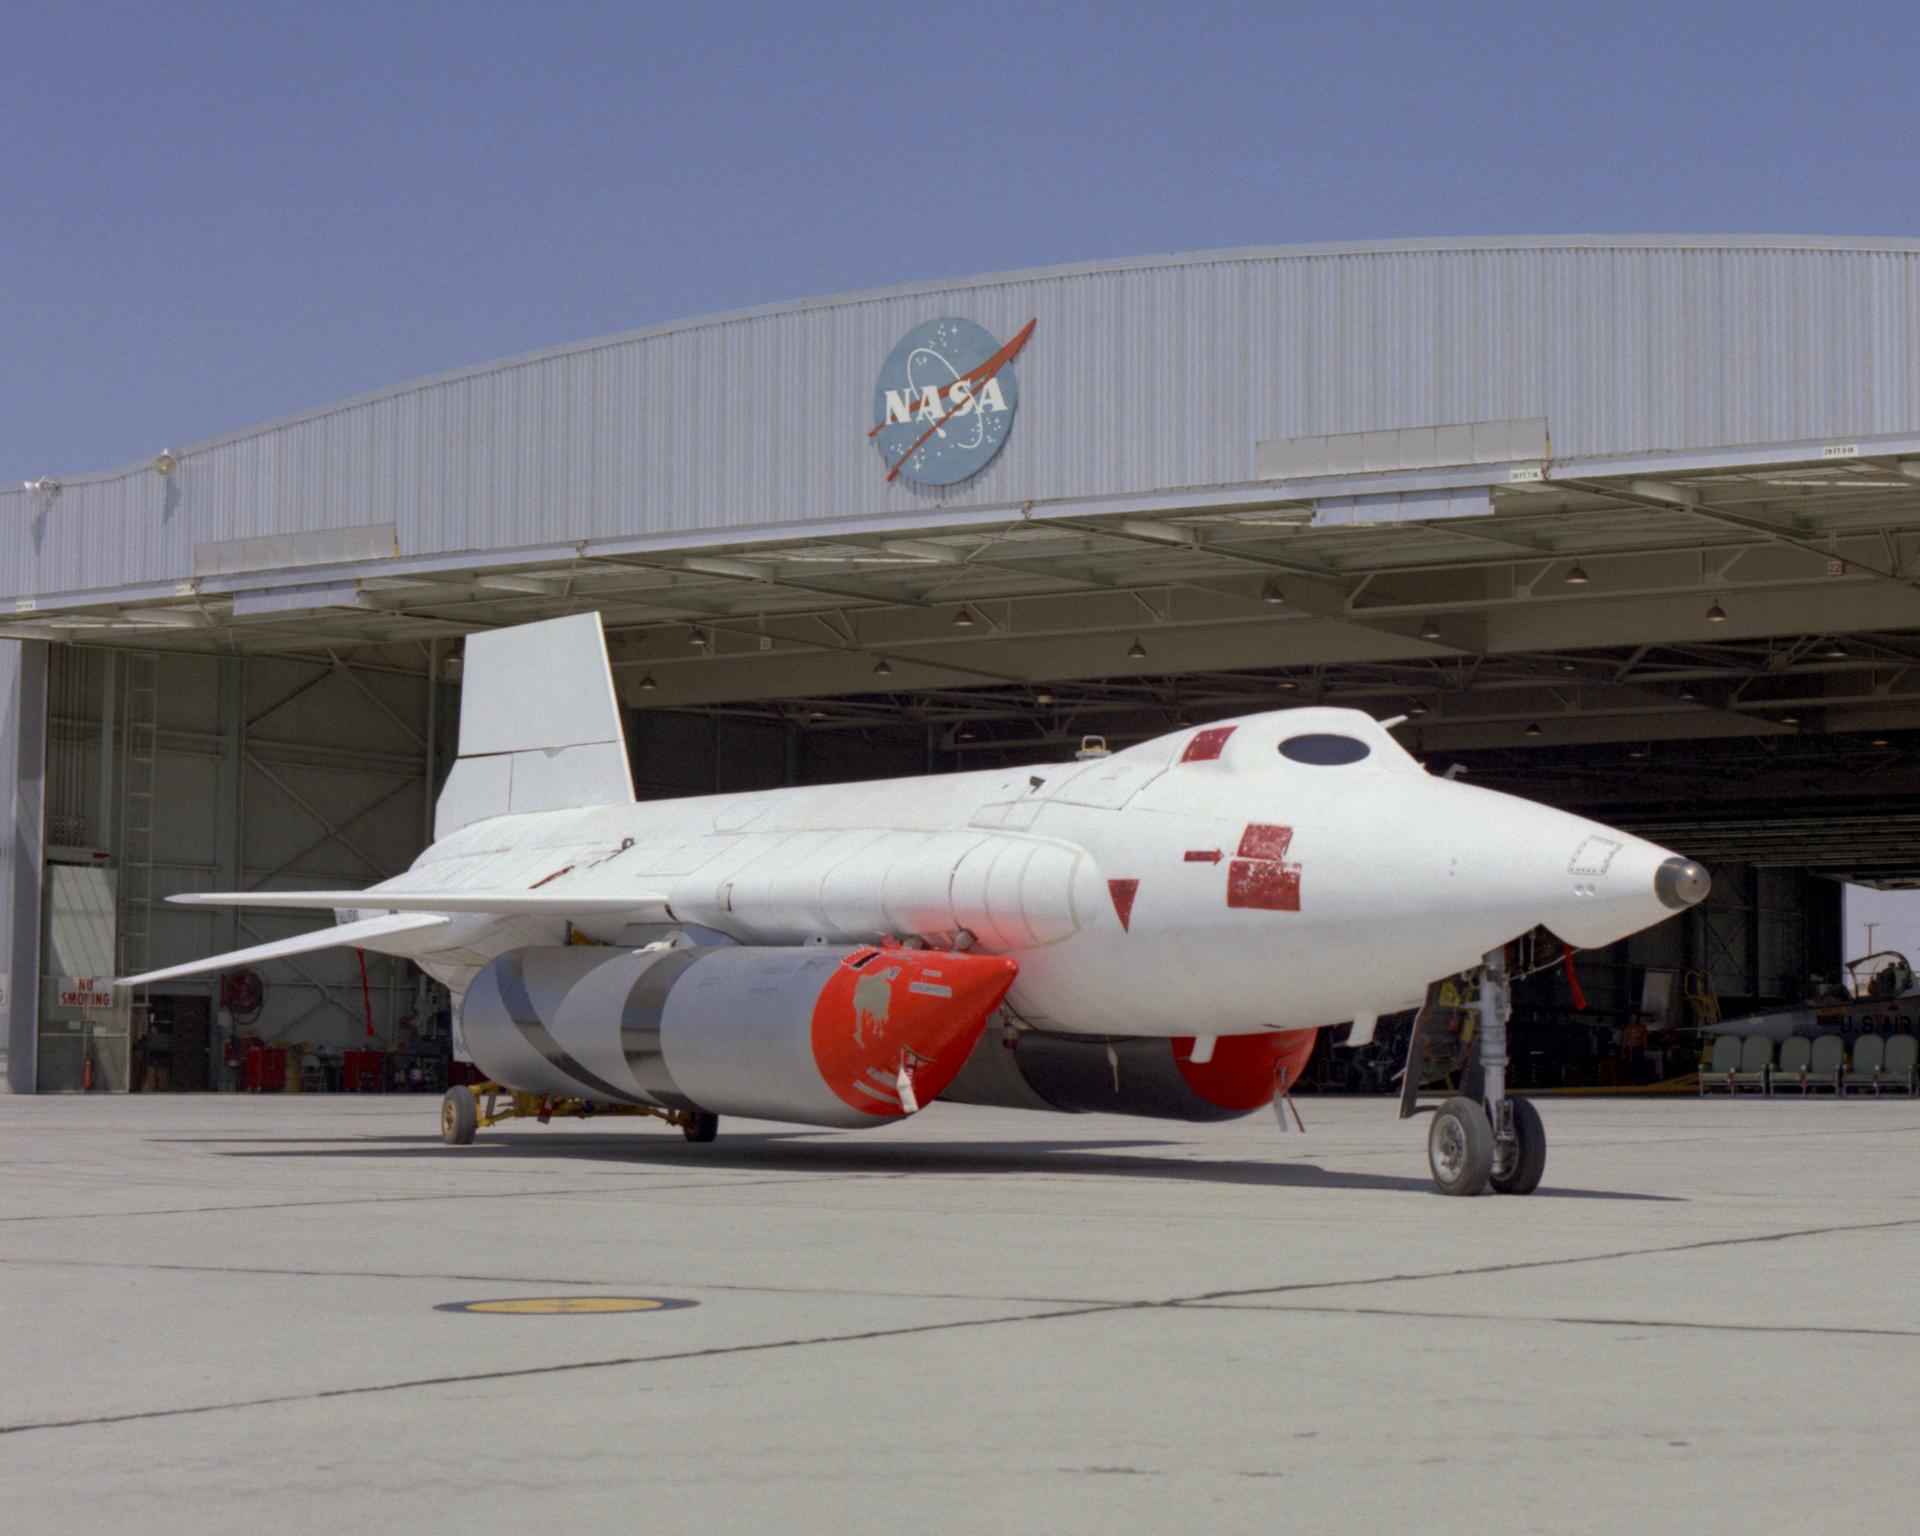 X-15A-2 with ablative coating and external tanks installed parked in front of hangar.